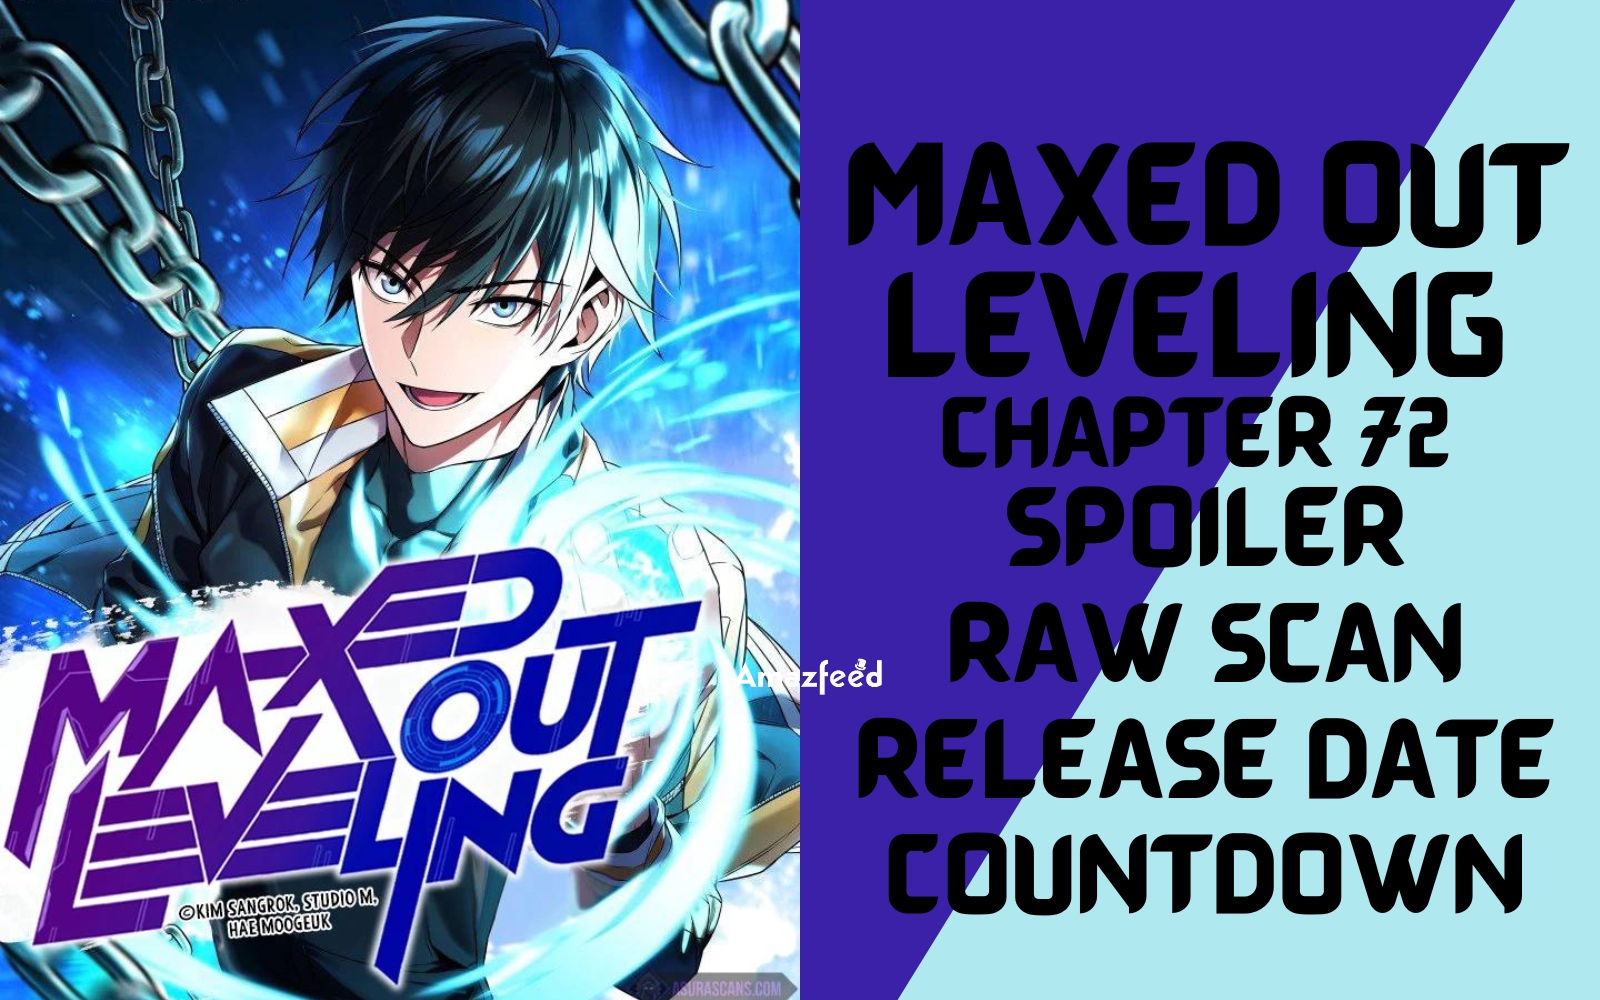 Maxed Out Leveling Chapter 72 Spoiler, Raw Scan, Plot, Color Page, Release Date